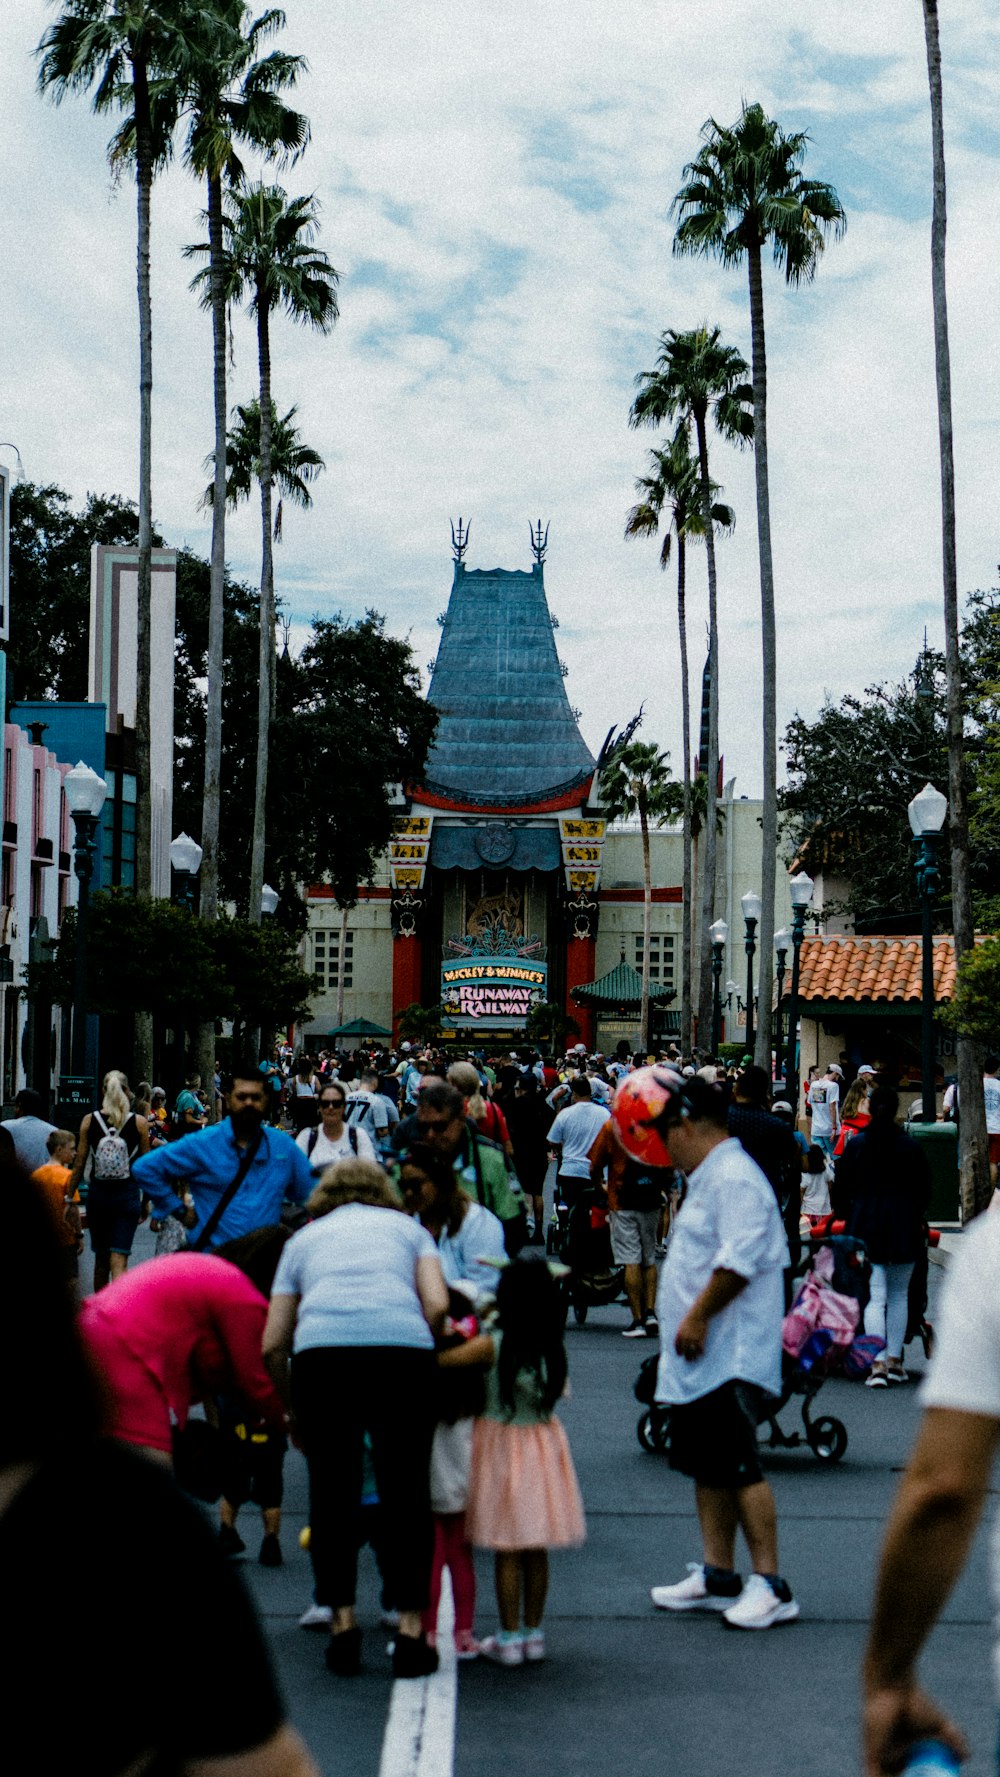 a crowd of people walking down a street next to tall palm trees